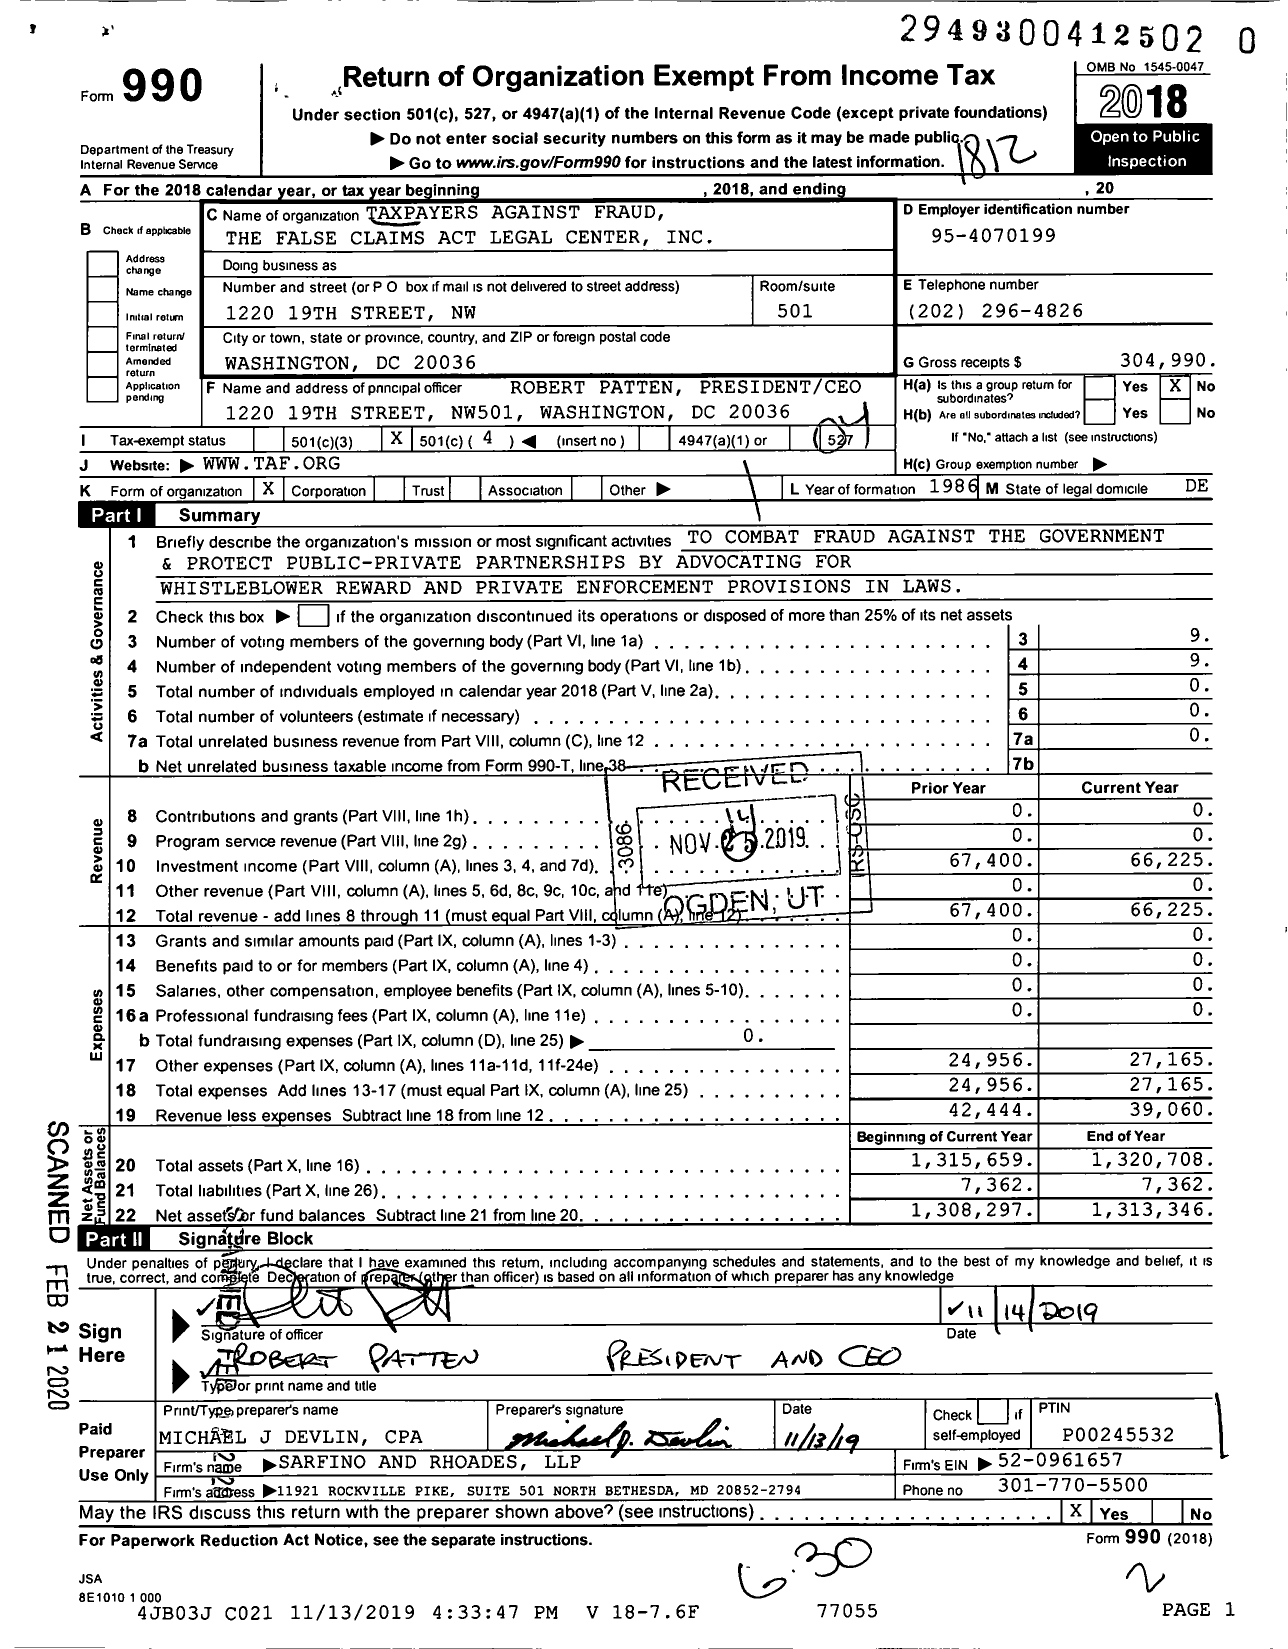 Image of first page of 2018 Form 990O for Taxpayers Against Fraud the False Claims Act Legal Center